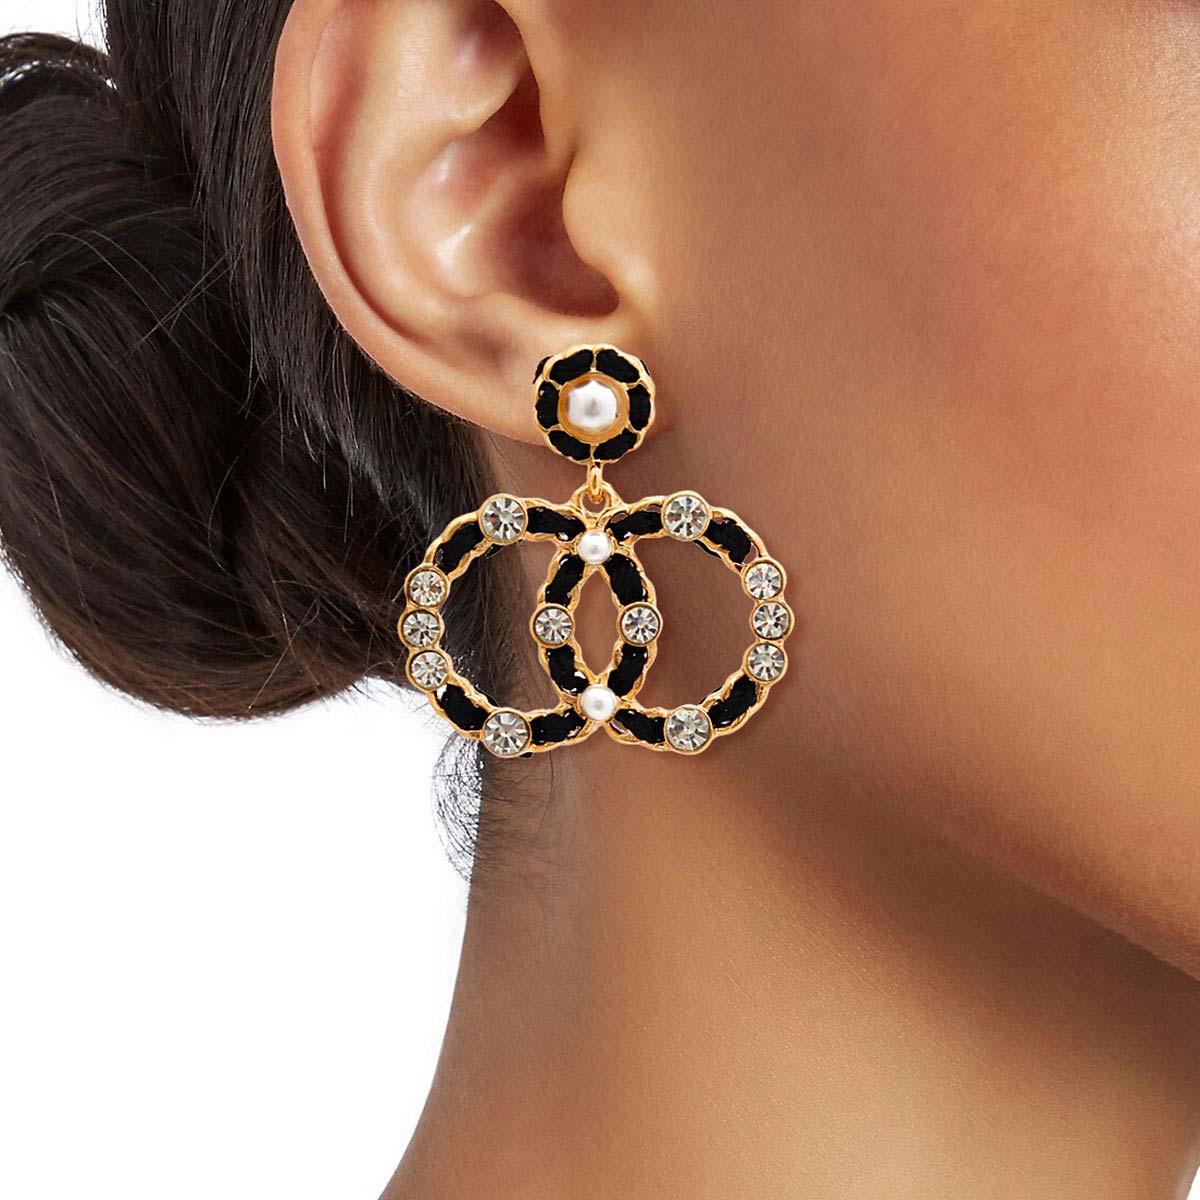 Gold and Black Woven Infinity Symbol Earrings